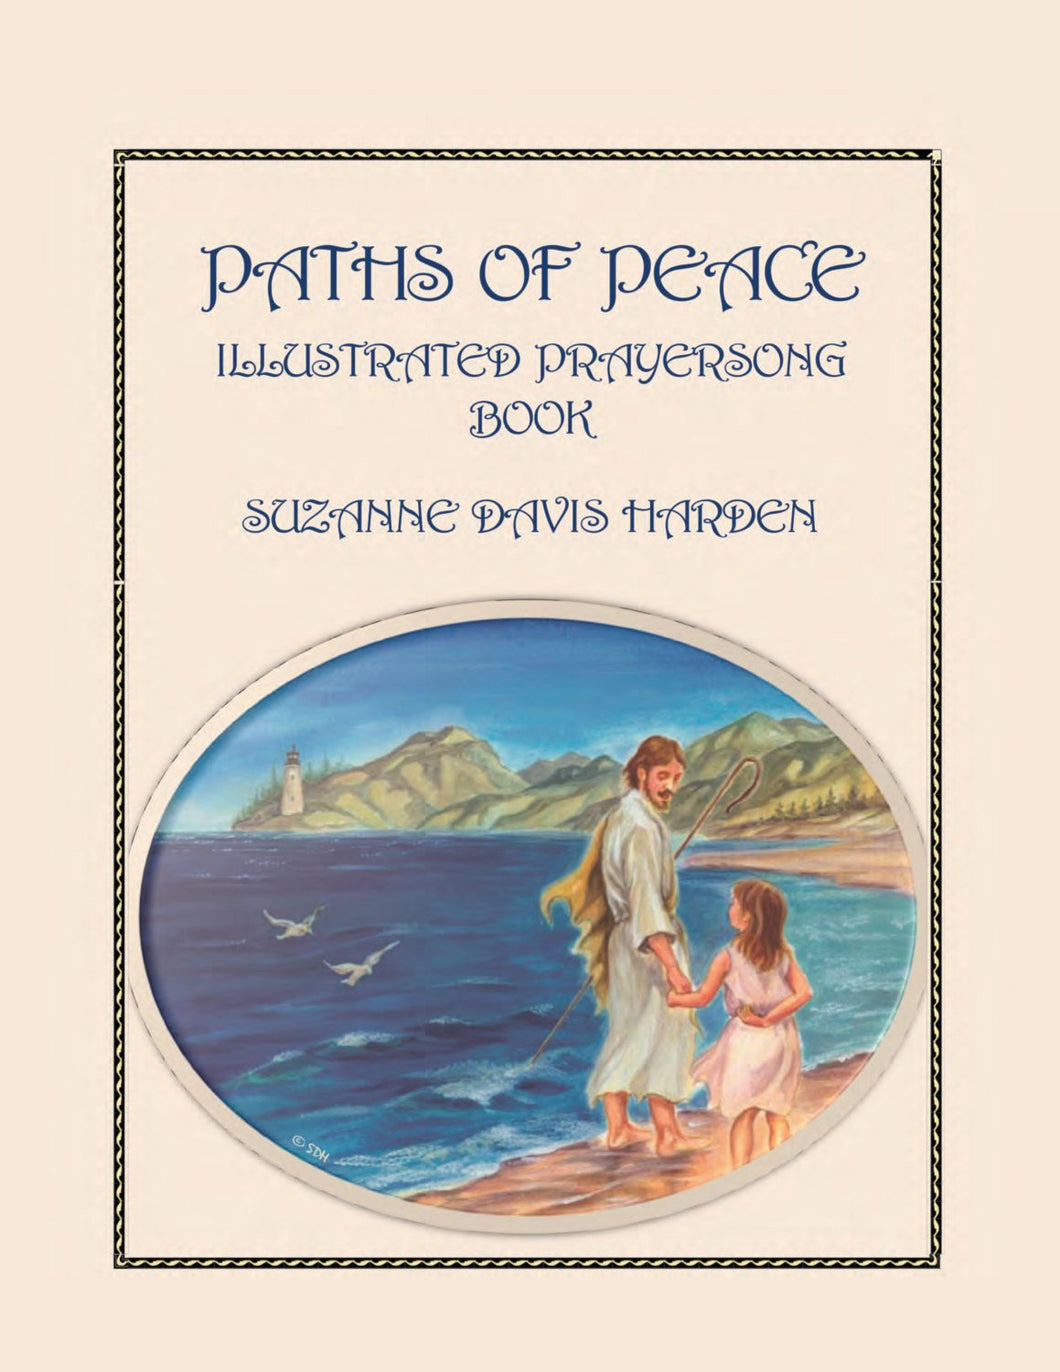 Book One-Prayer Song Book~ Paths of Peace Illustrated Prayersong Book by Suzanne Davis Harden